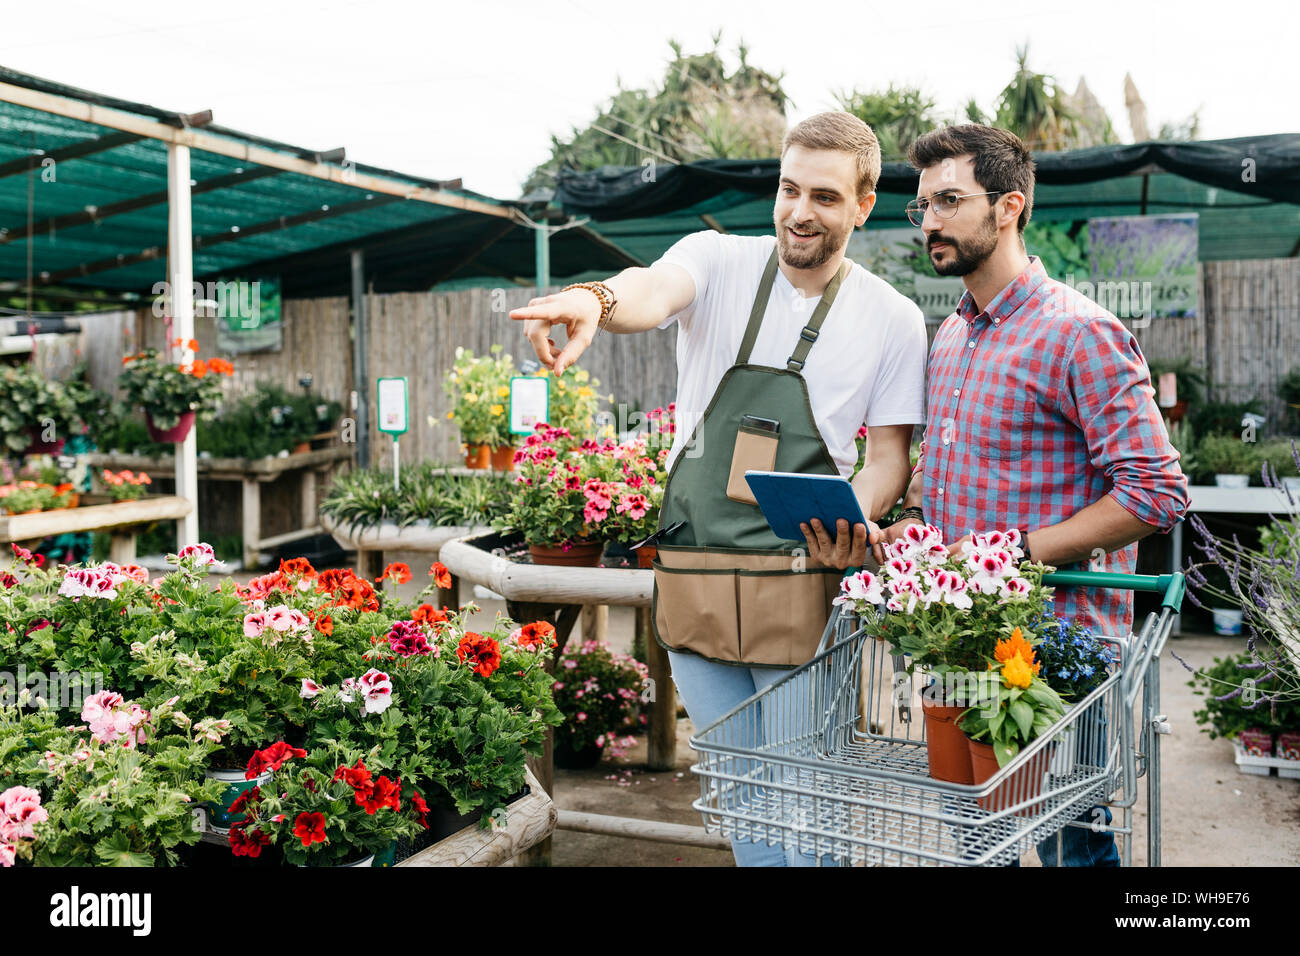 Worker with tablet in a garden center advising customer Stock Photo